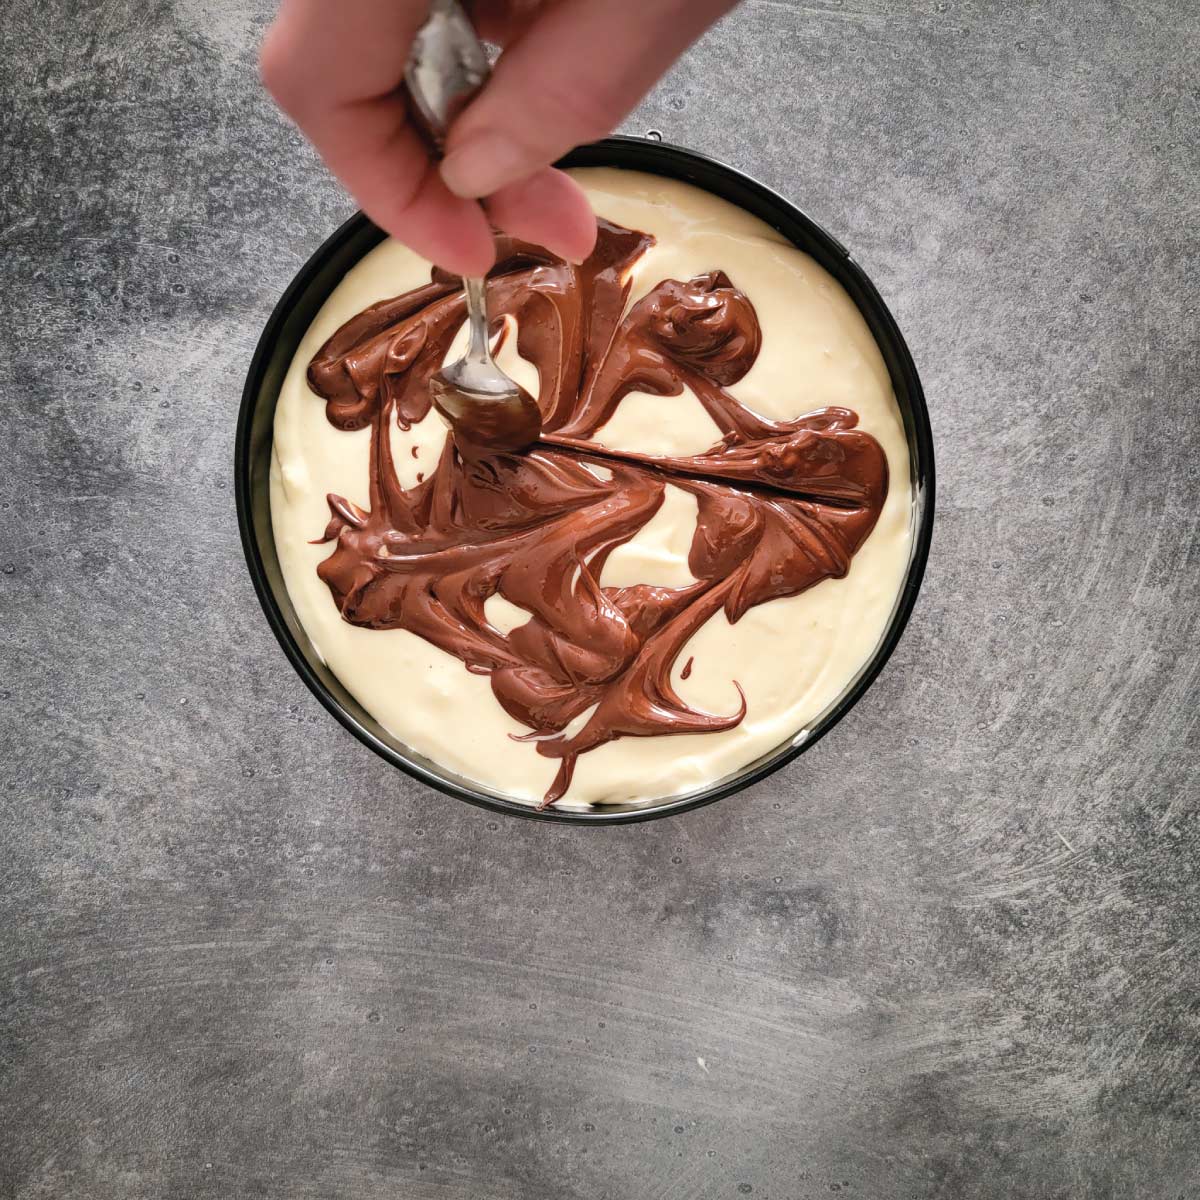 Cheesecake batter in the springform pan with chocolate being swirled around on the top.